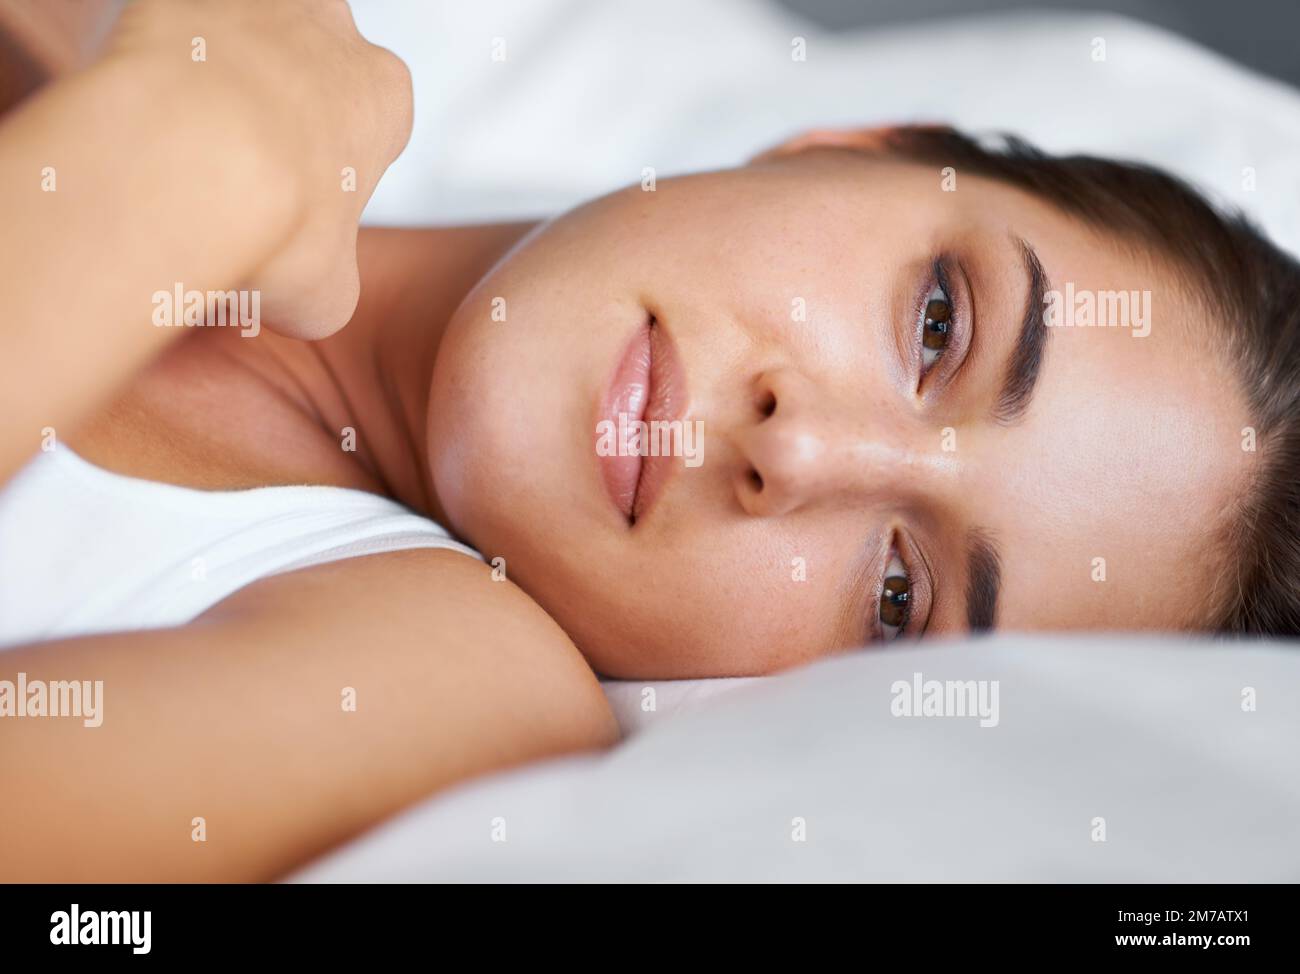 Beauty in bed. Portrait of a young woman lying on her side in bed. Stock Photo